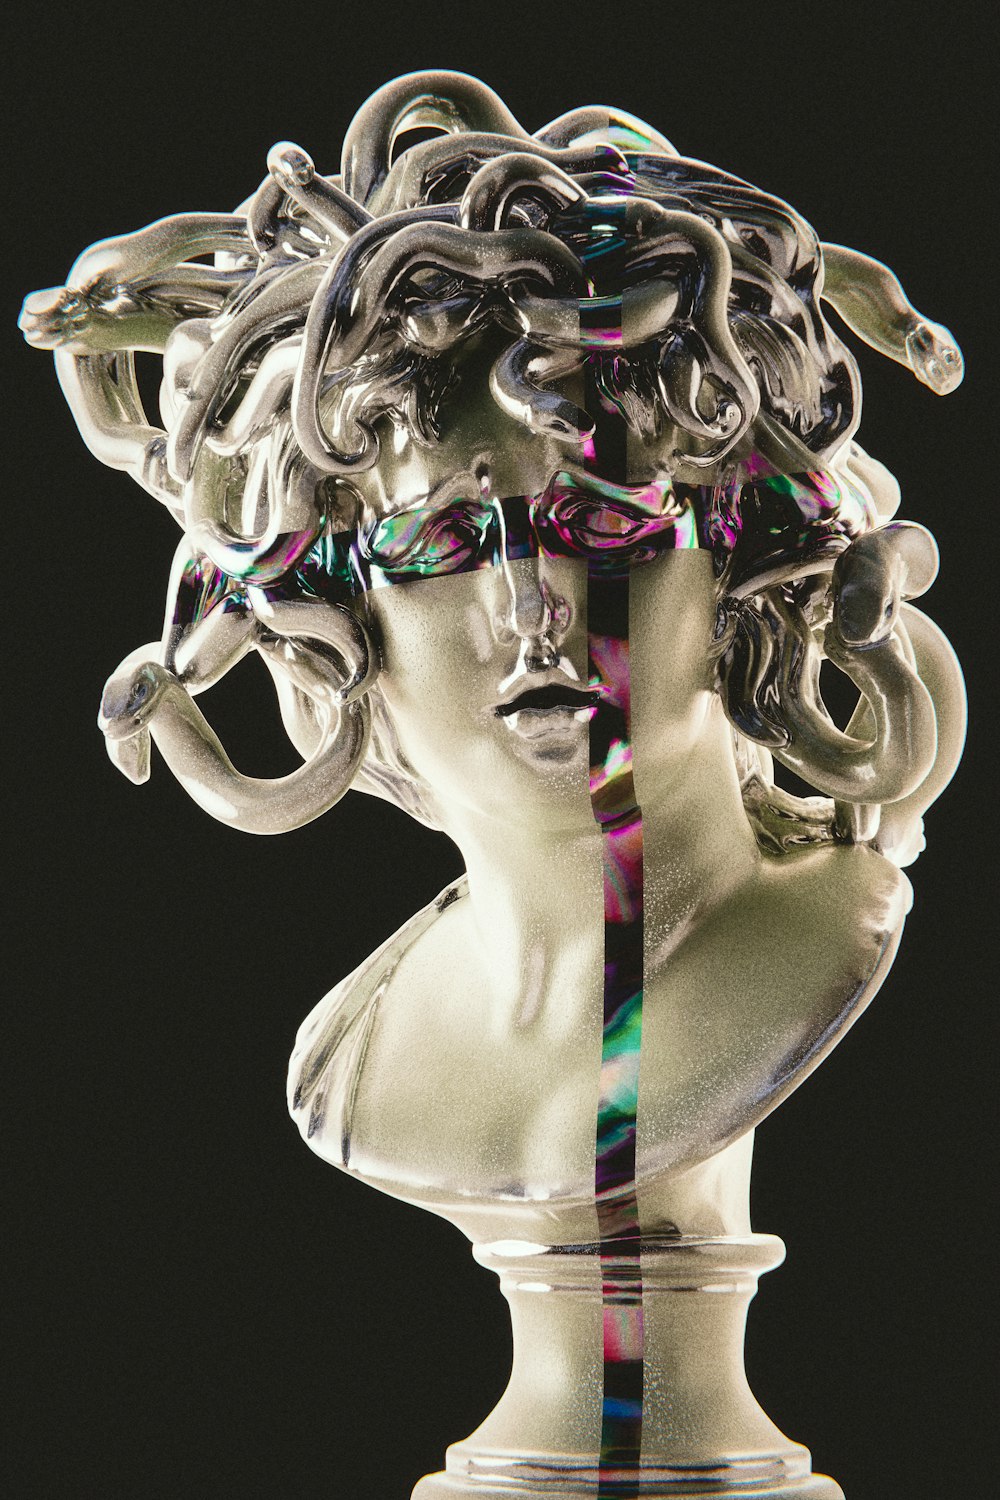 a sculpture of a woman's head with chains on it